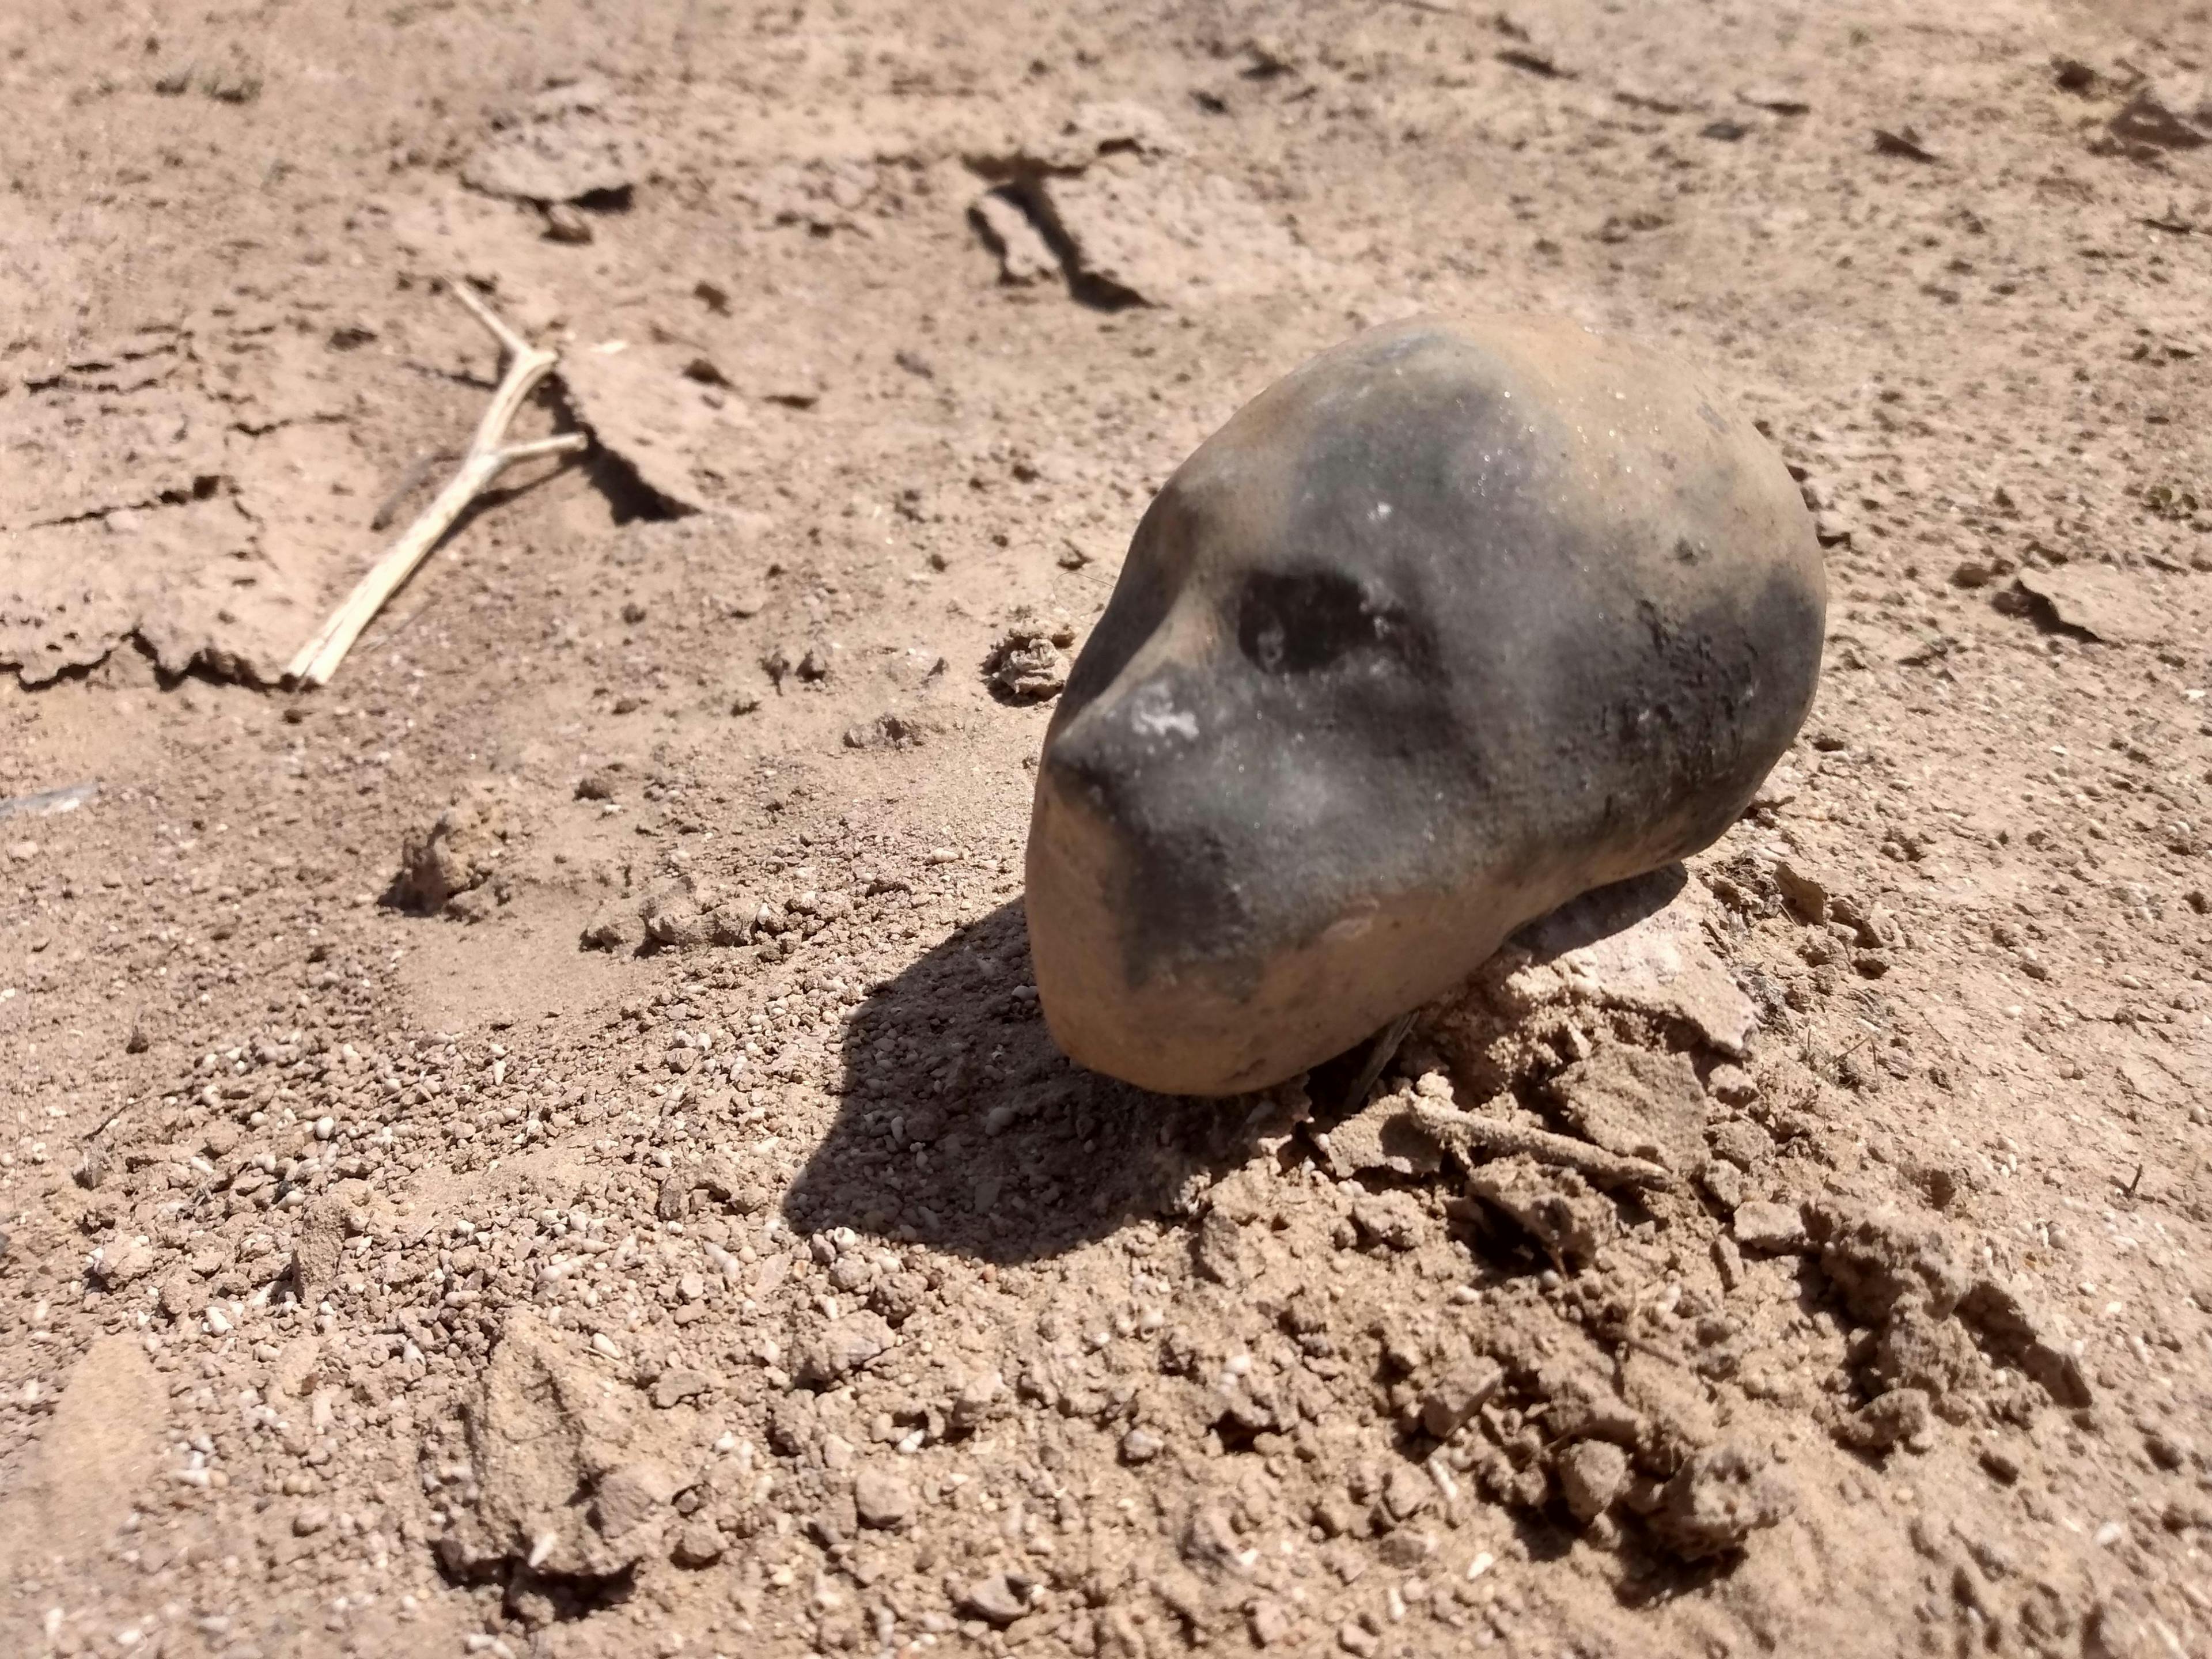 The first Little Martian, dug from the ground